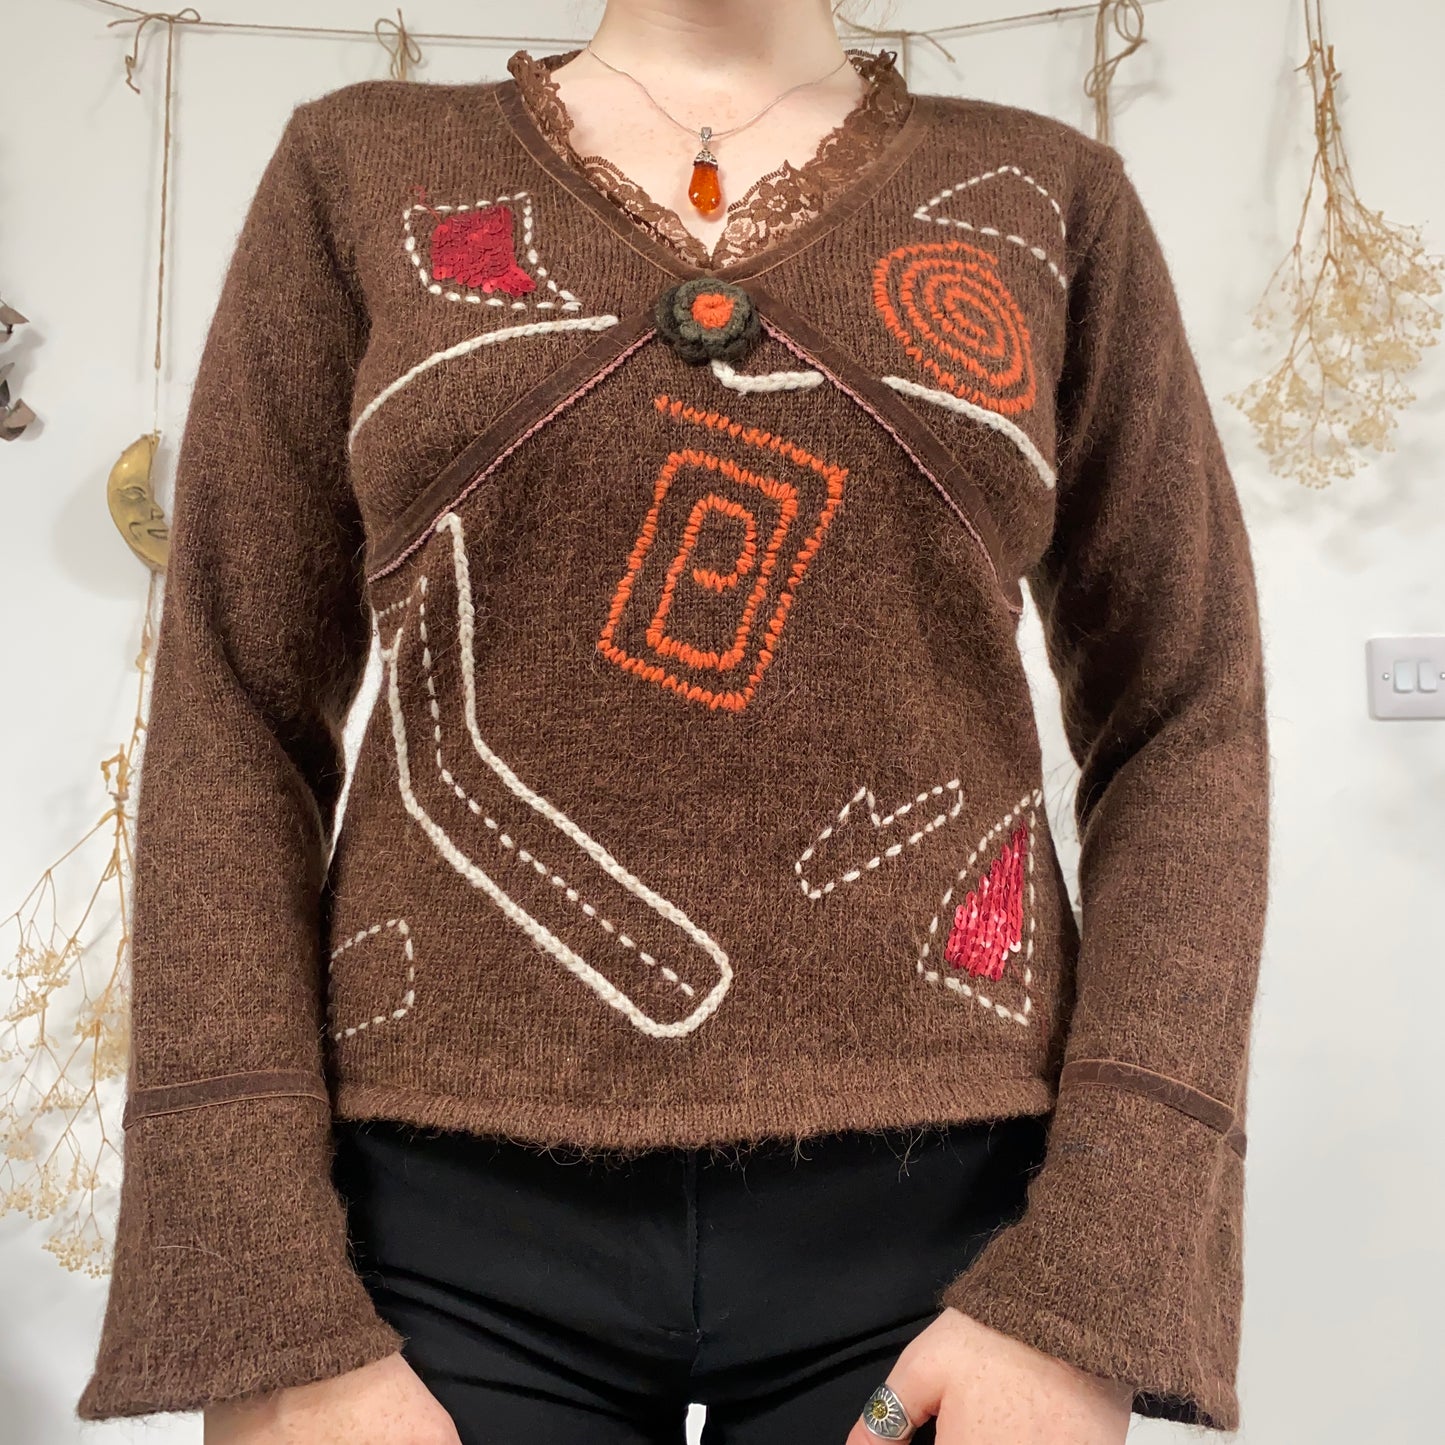 Brown knit top - size M